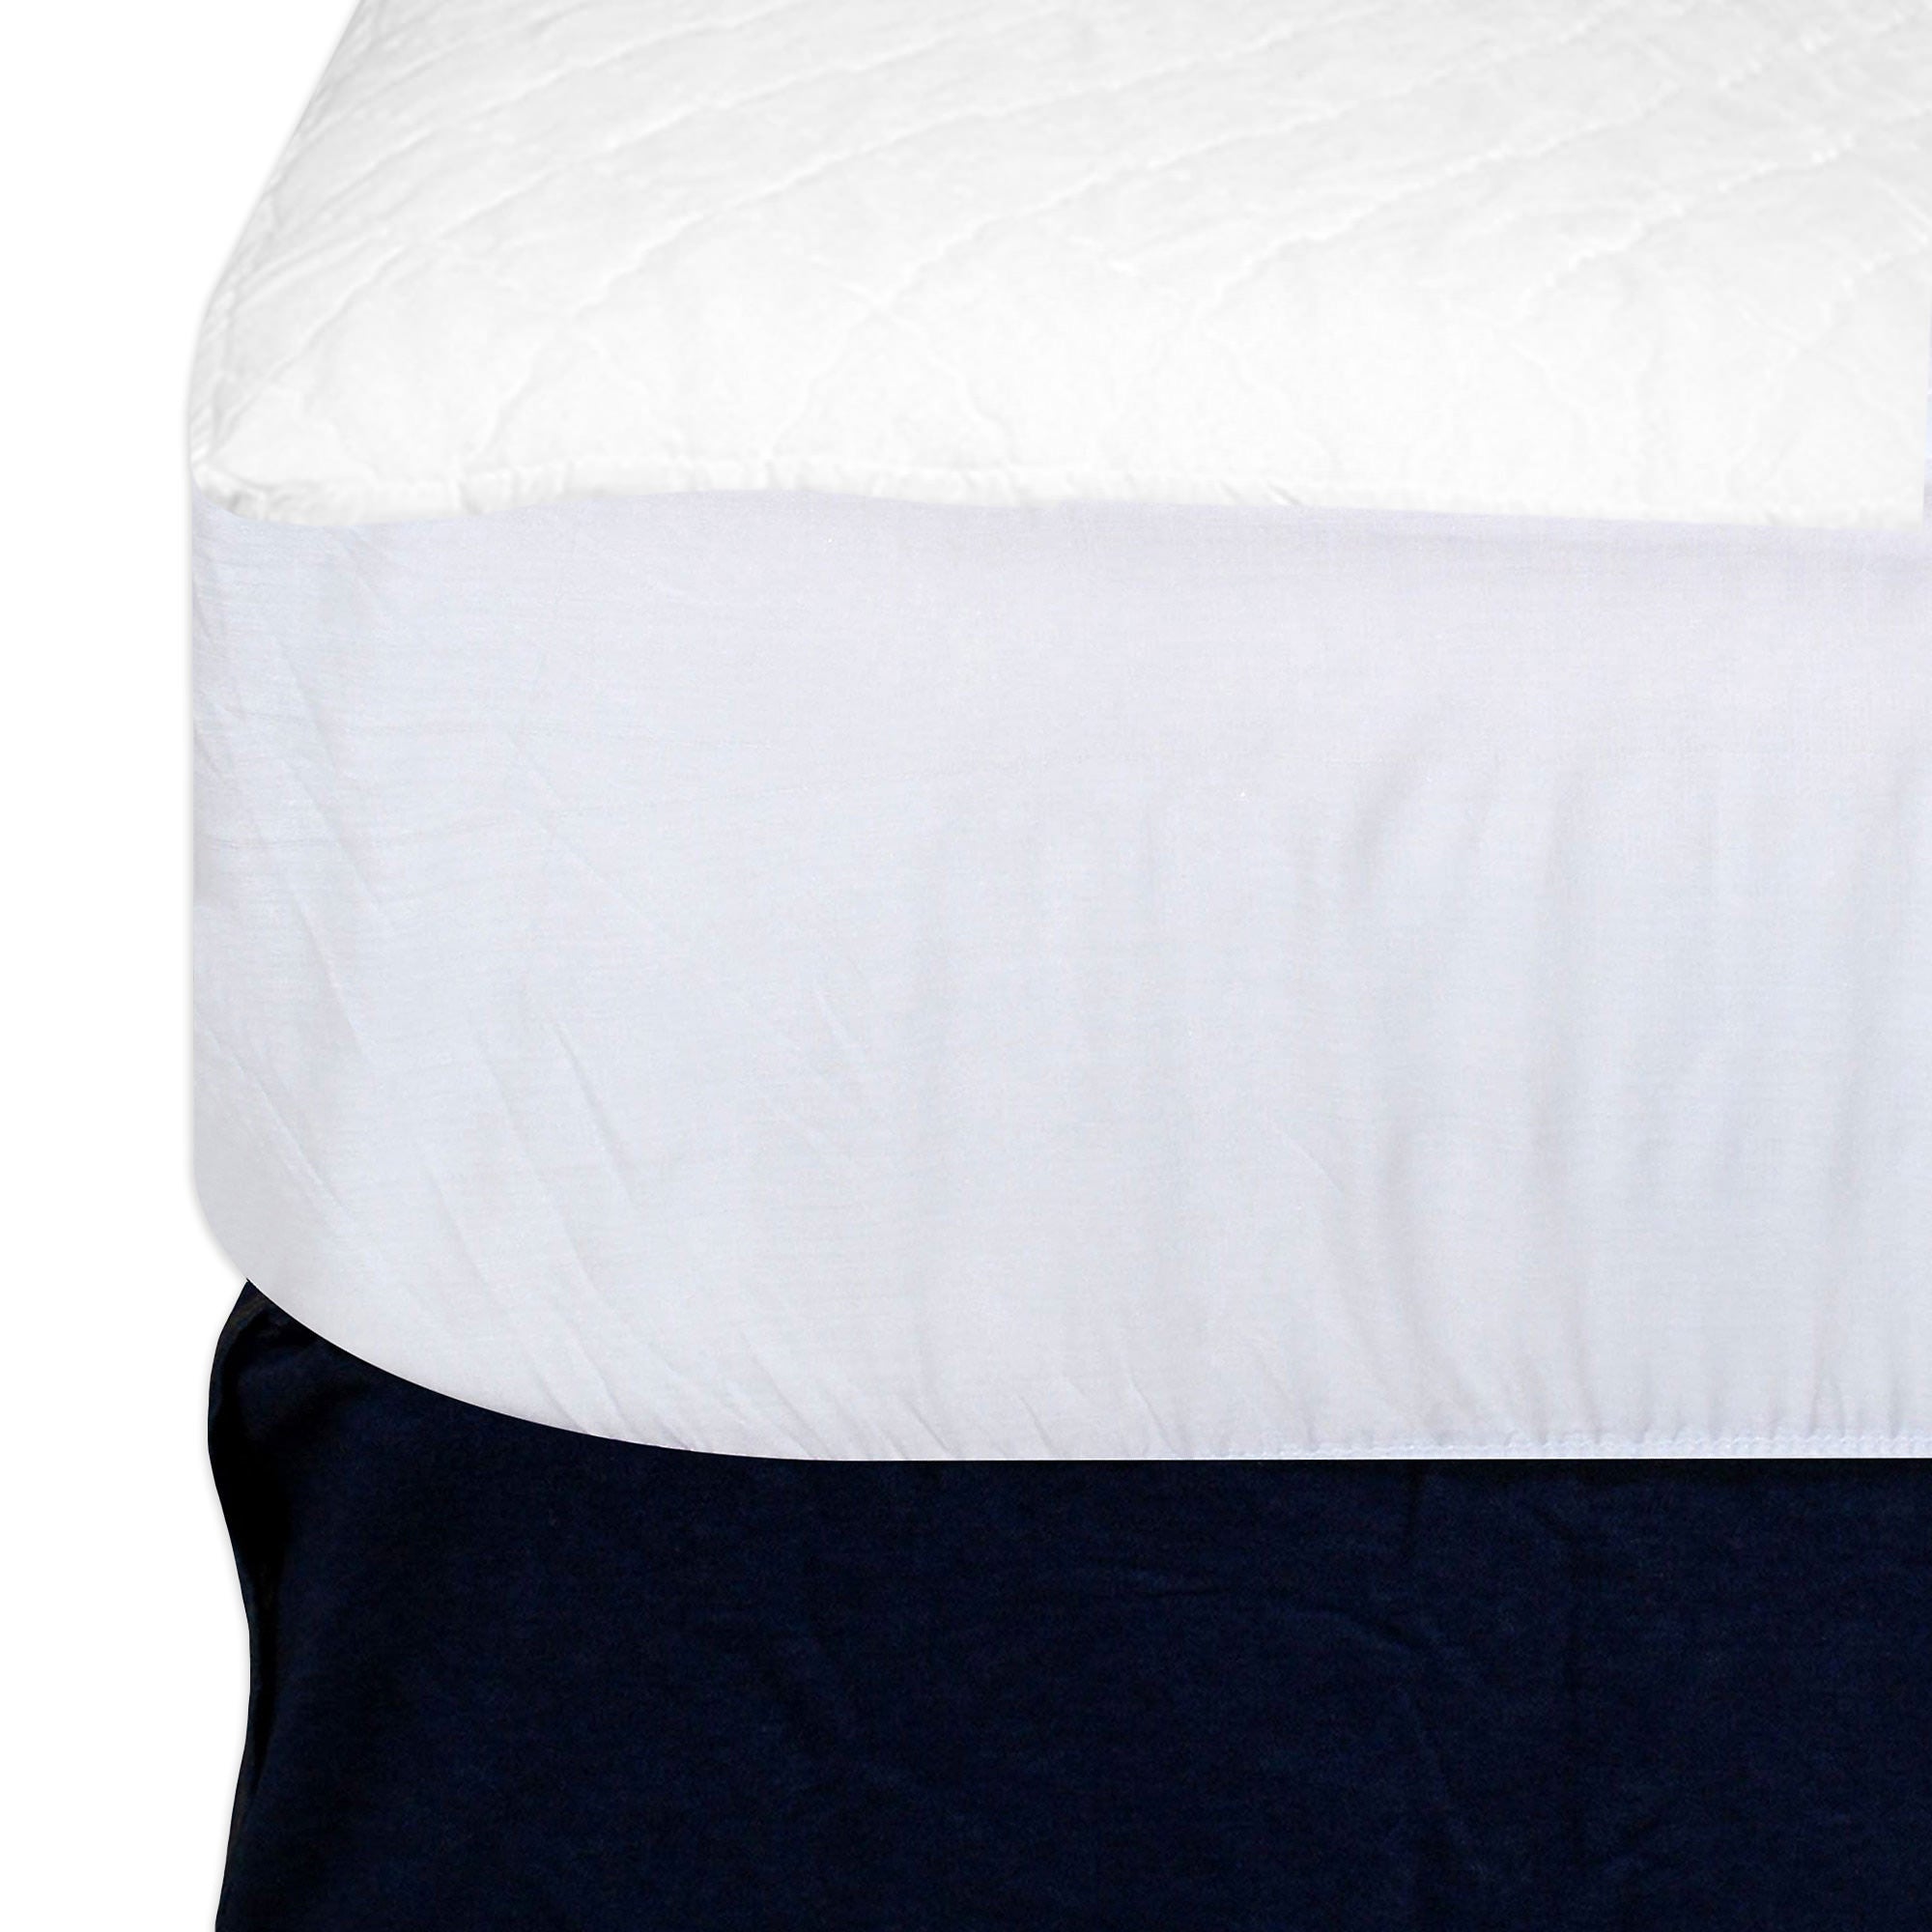 Waterproof Mattress Pad (Fitted) - National Incontinence